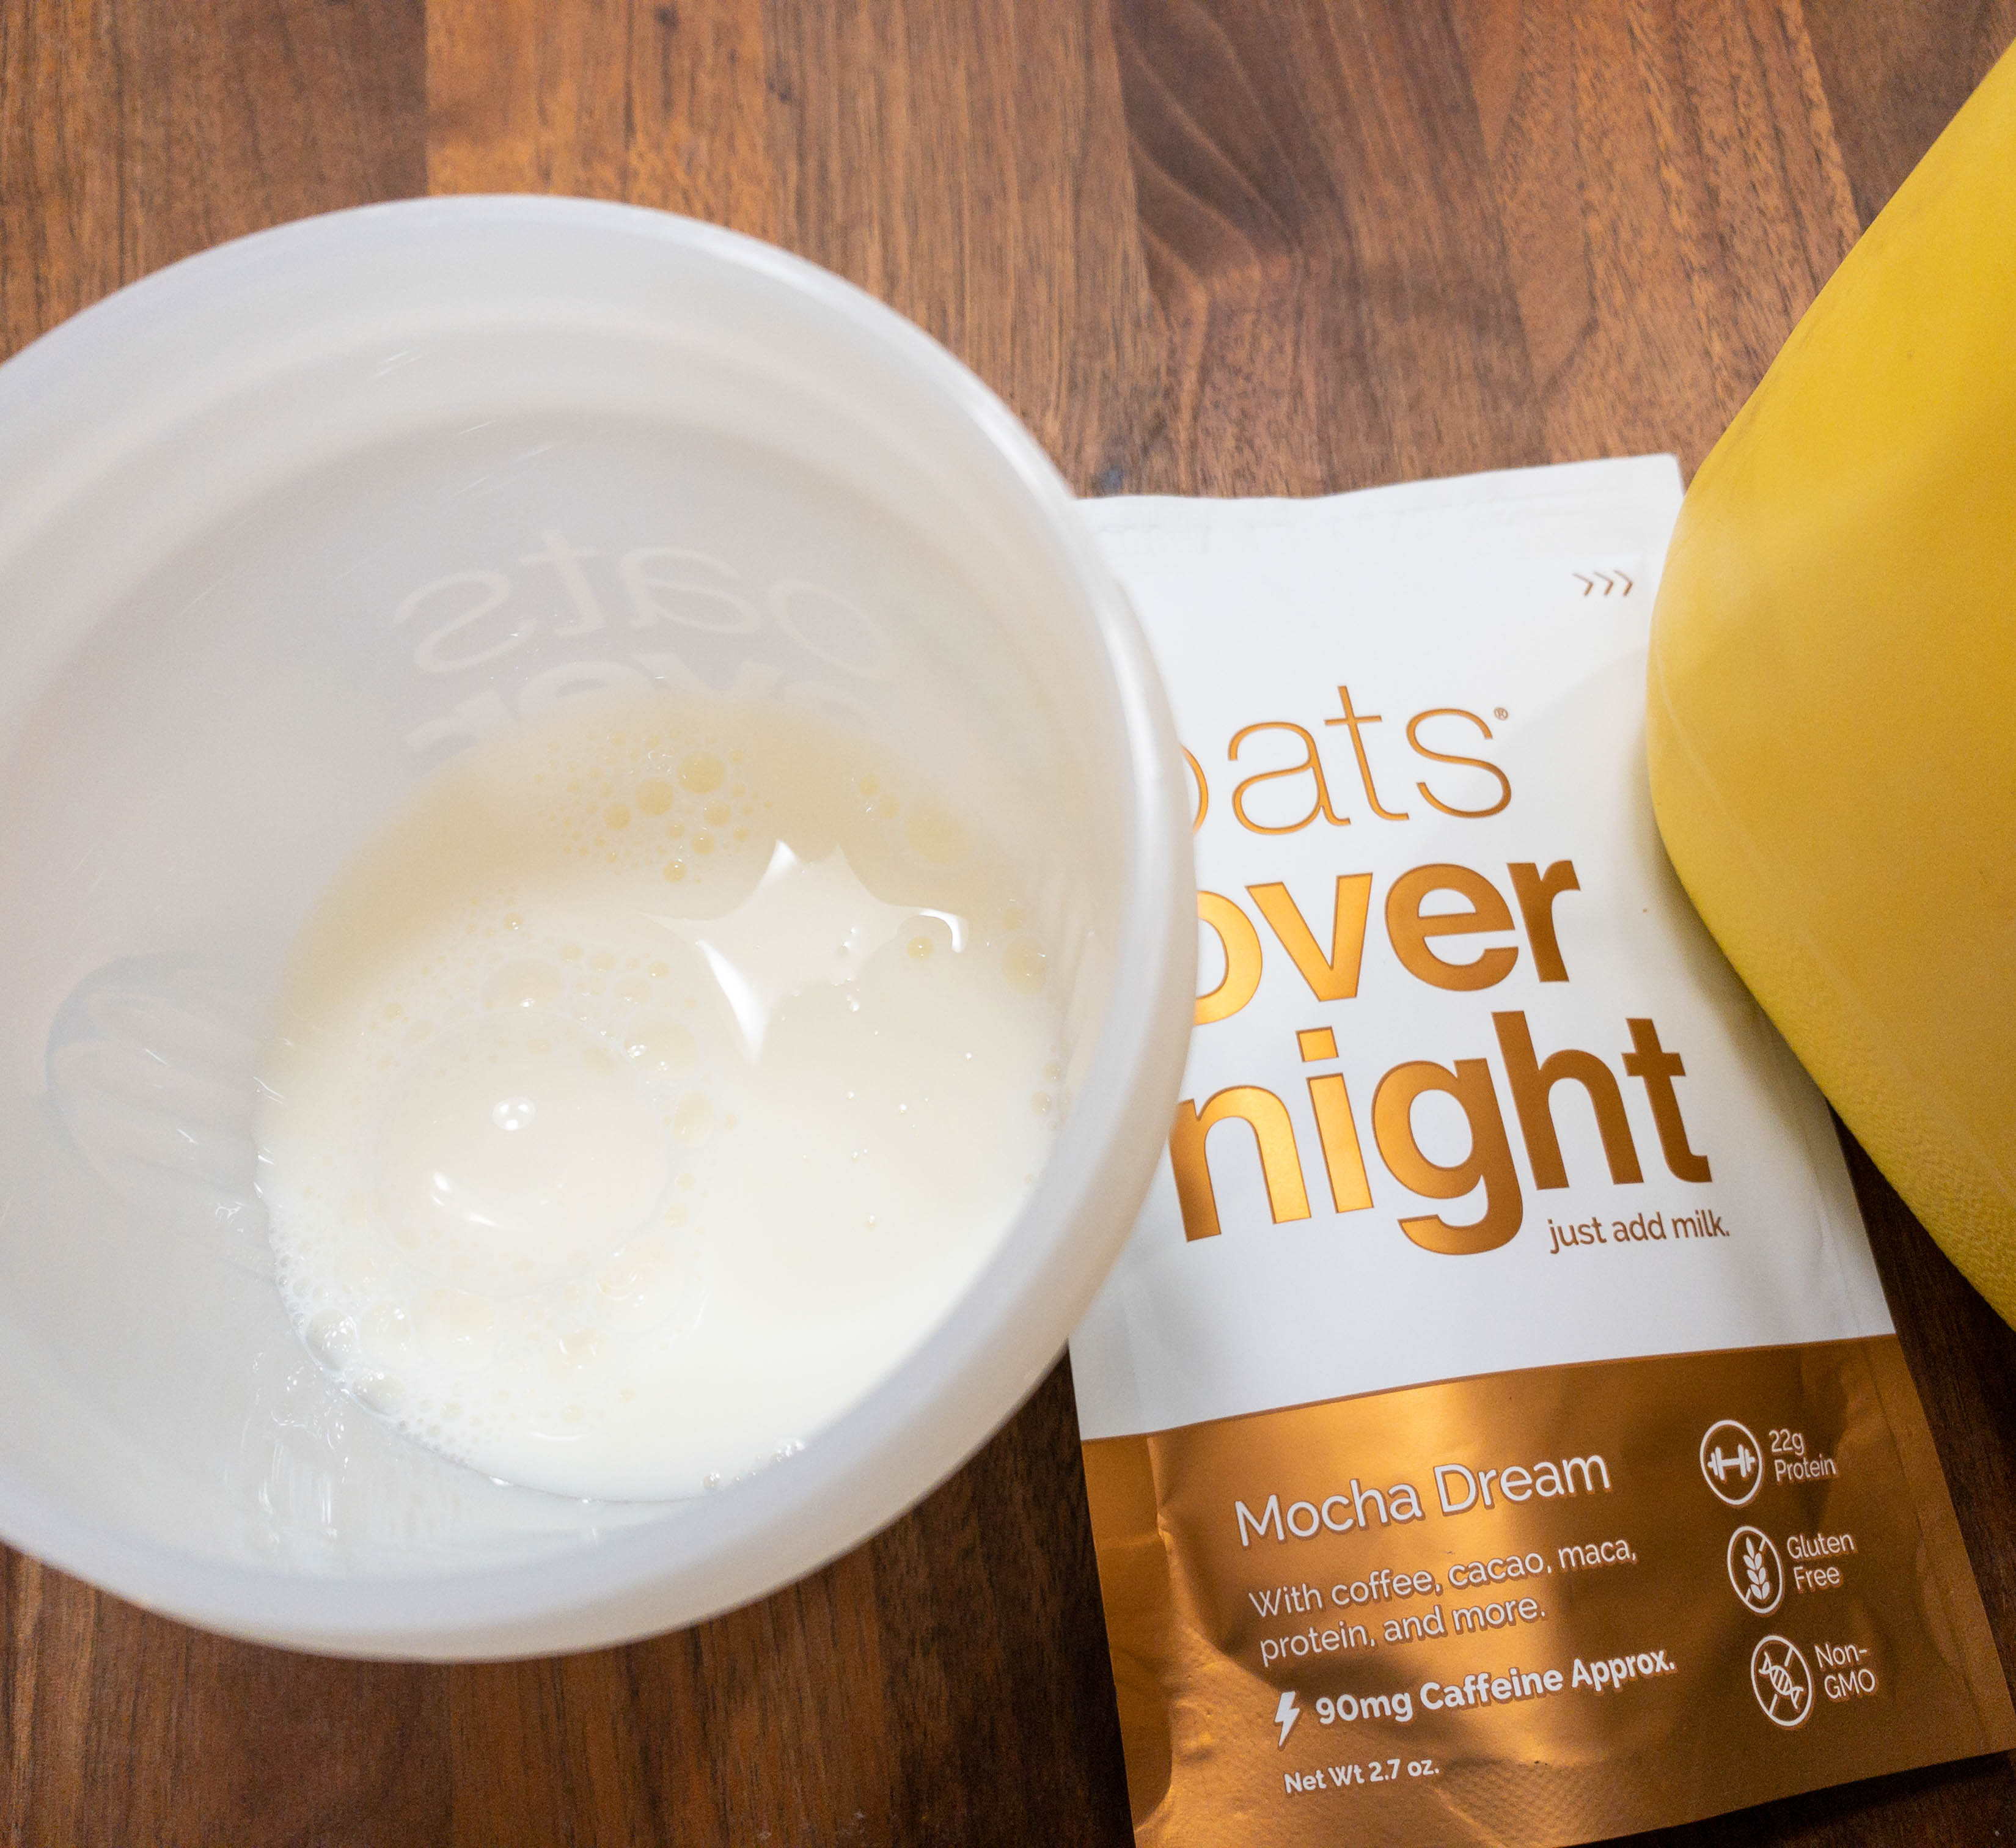 Oats Overnight is offering a 22% discount for life when you subscribe to  select plans now - CNET